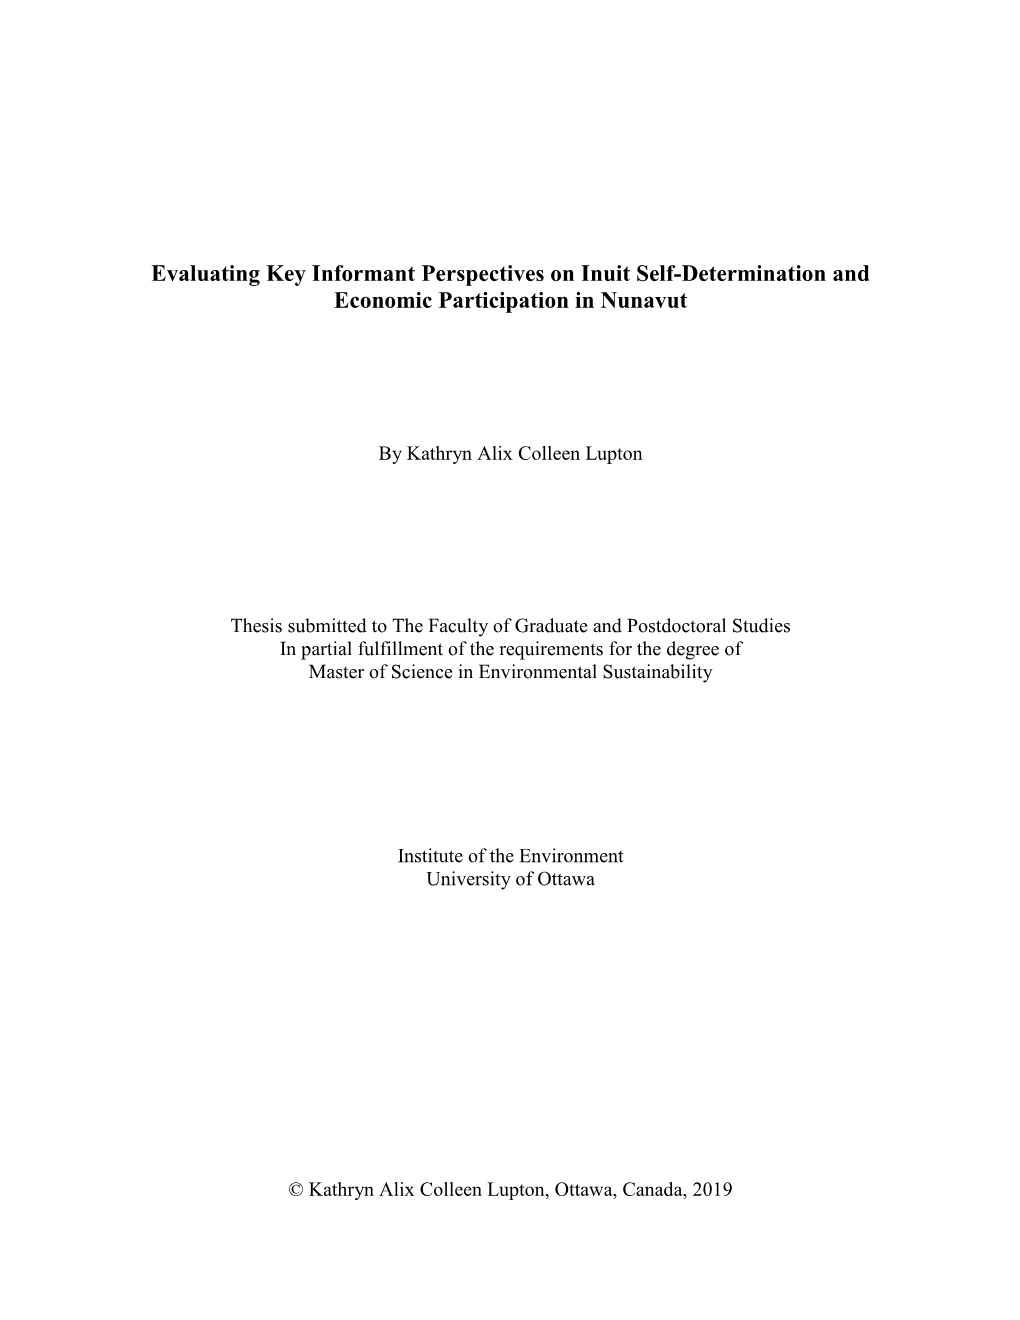 Evaluating Key Informant Perspectives on Inuit Self-Determination and Economic Participation in Nunavut